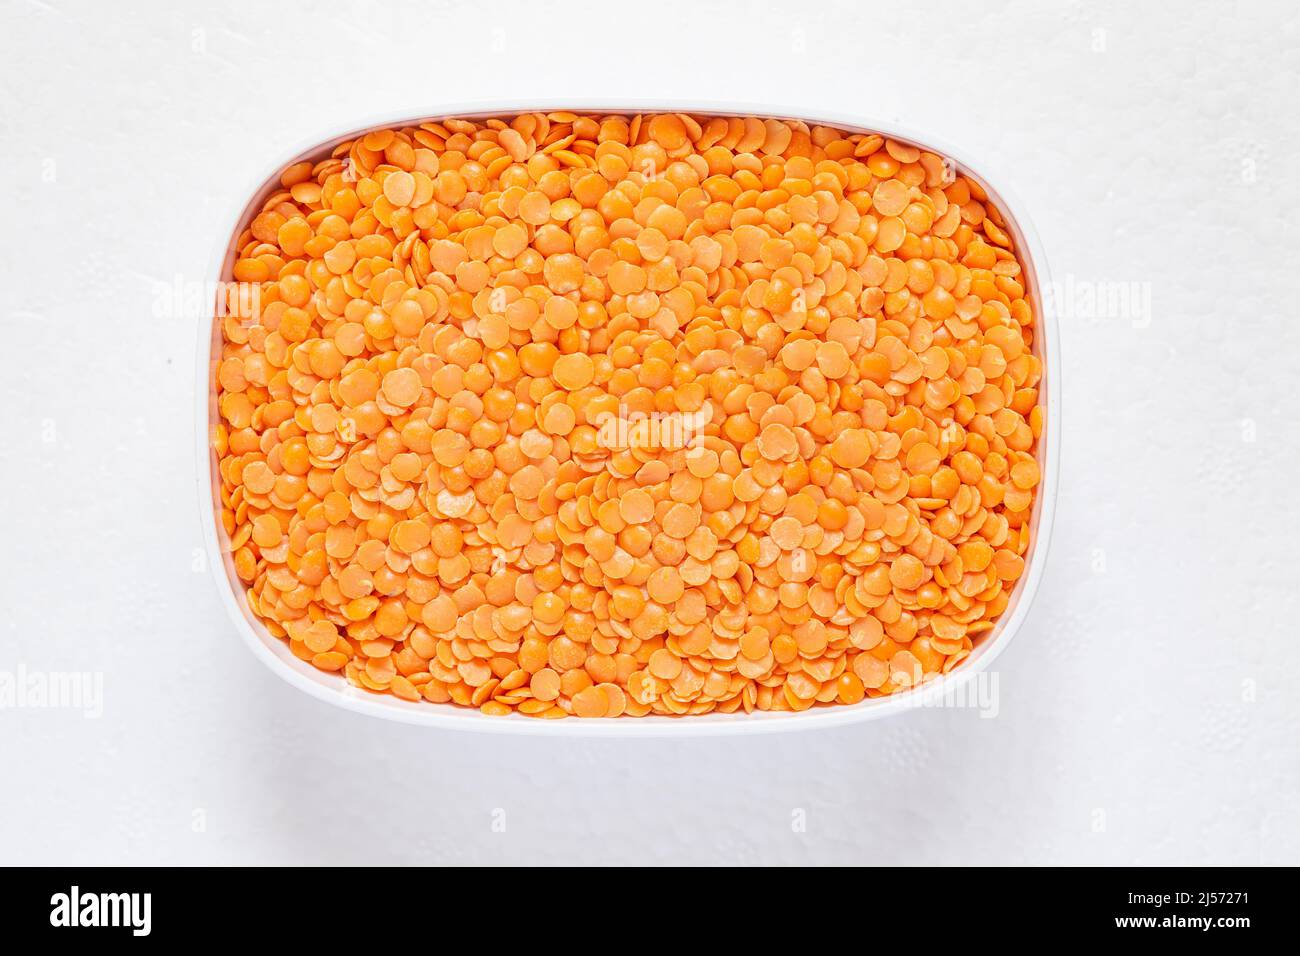 Red split lentil close-up in a plate. Stock Photo